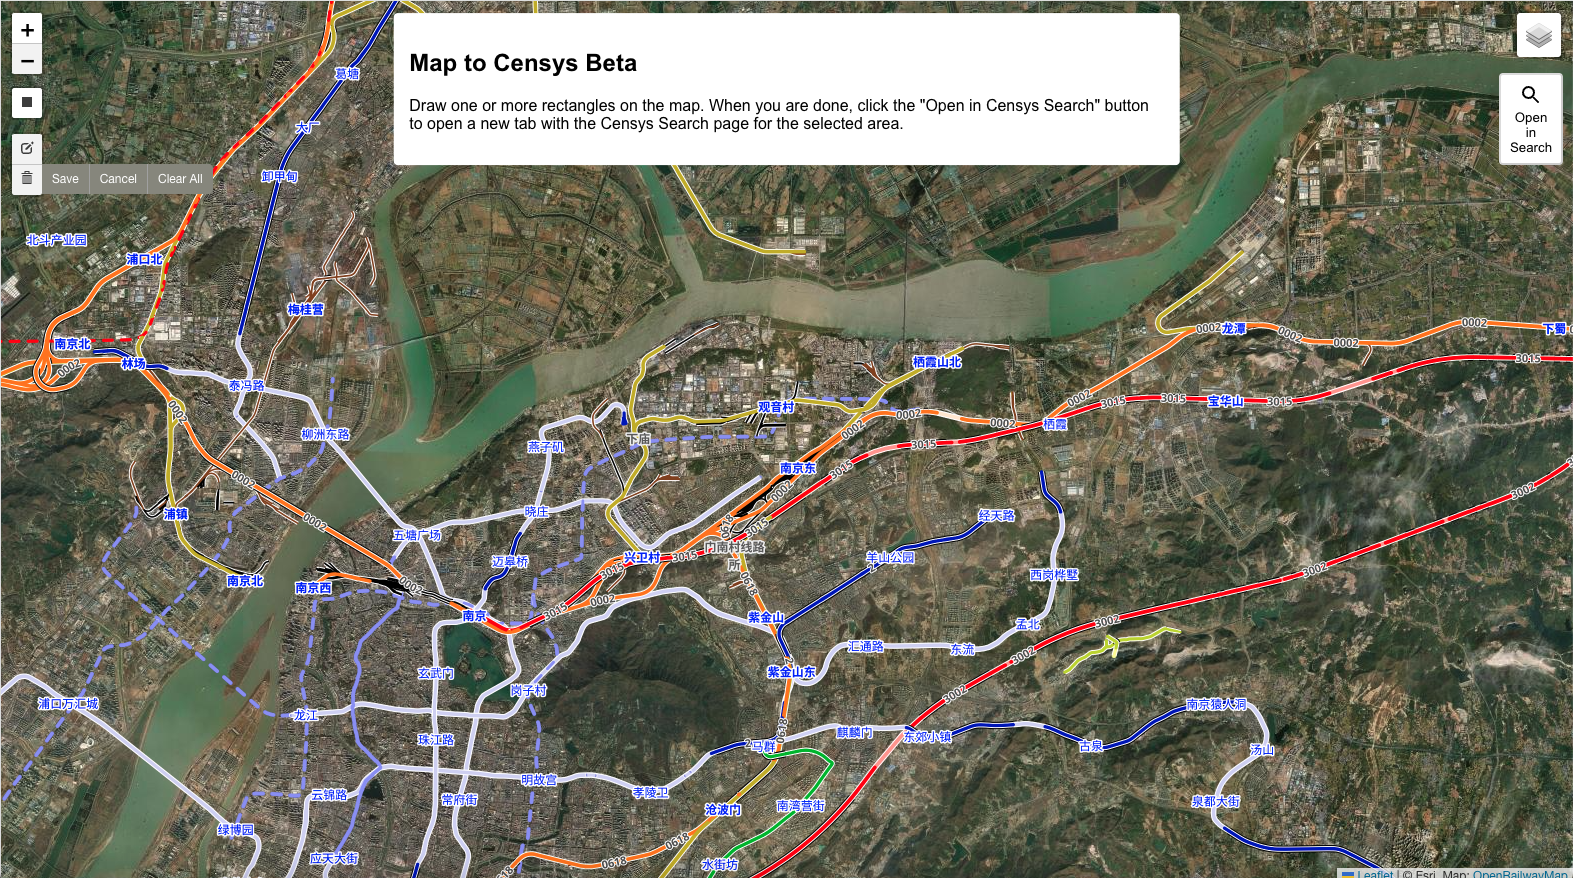 Map to Censys Beta World Imagery